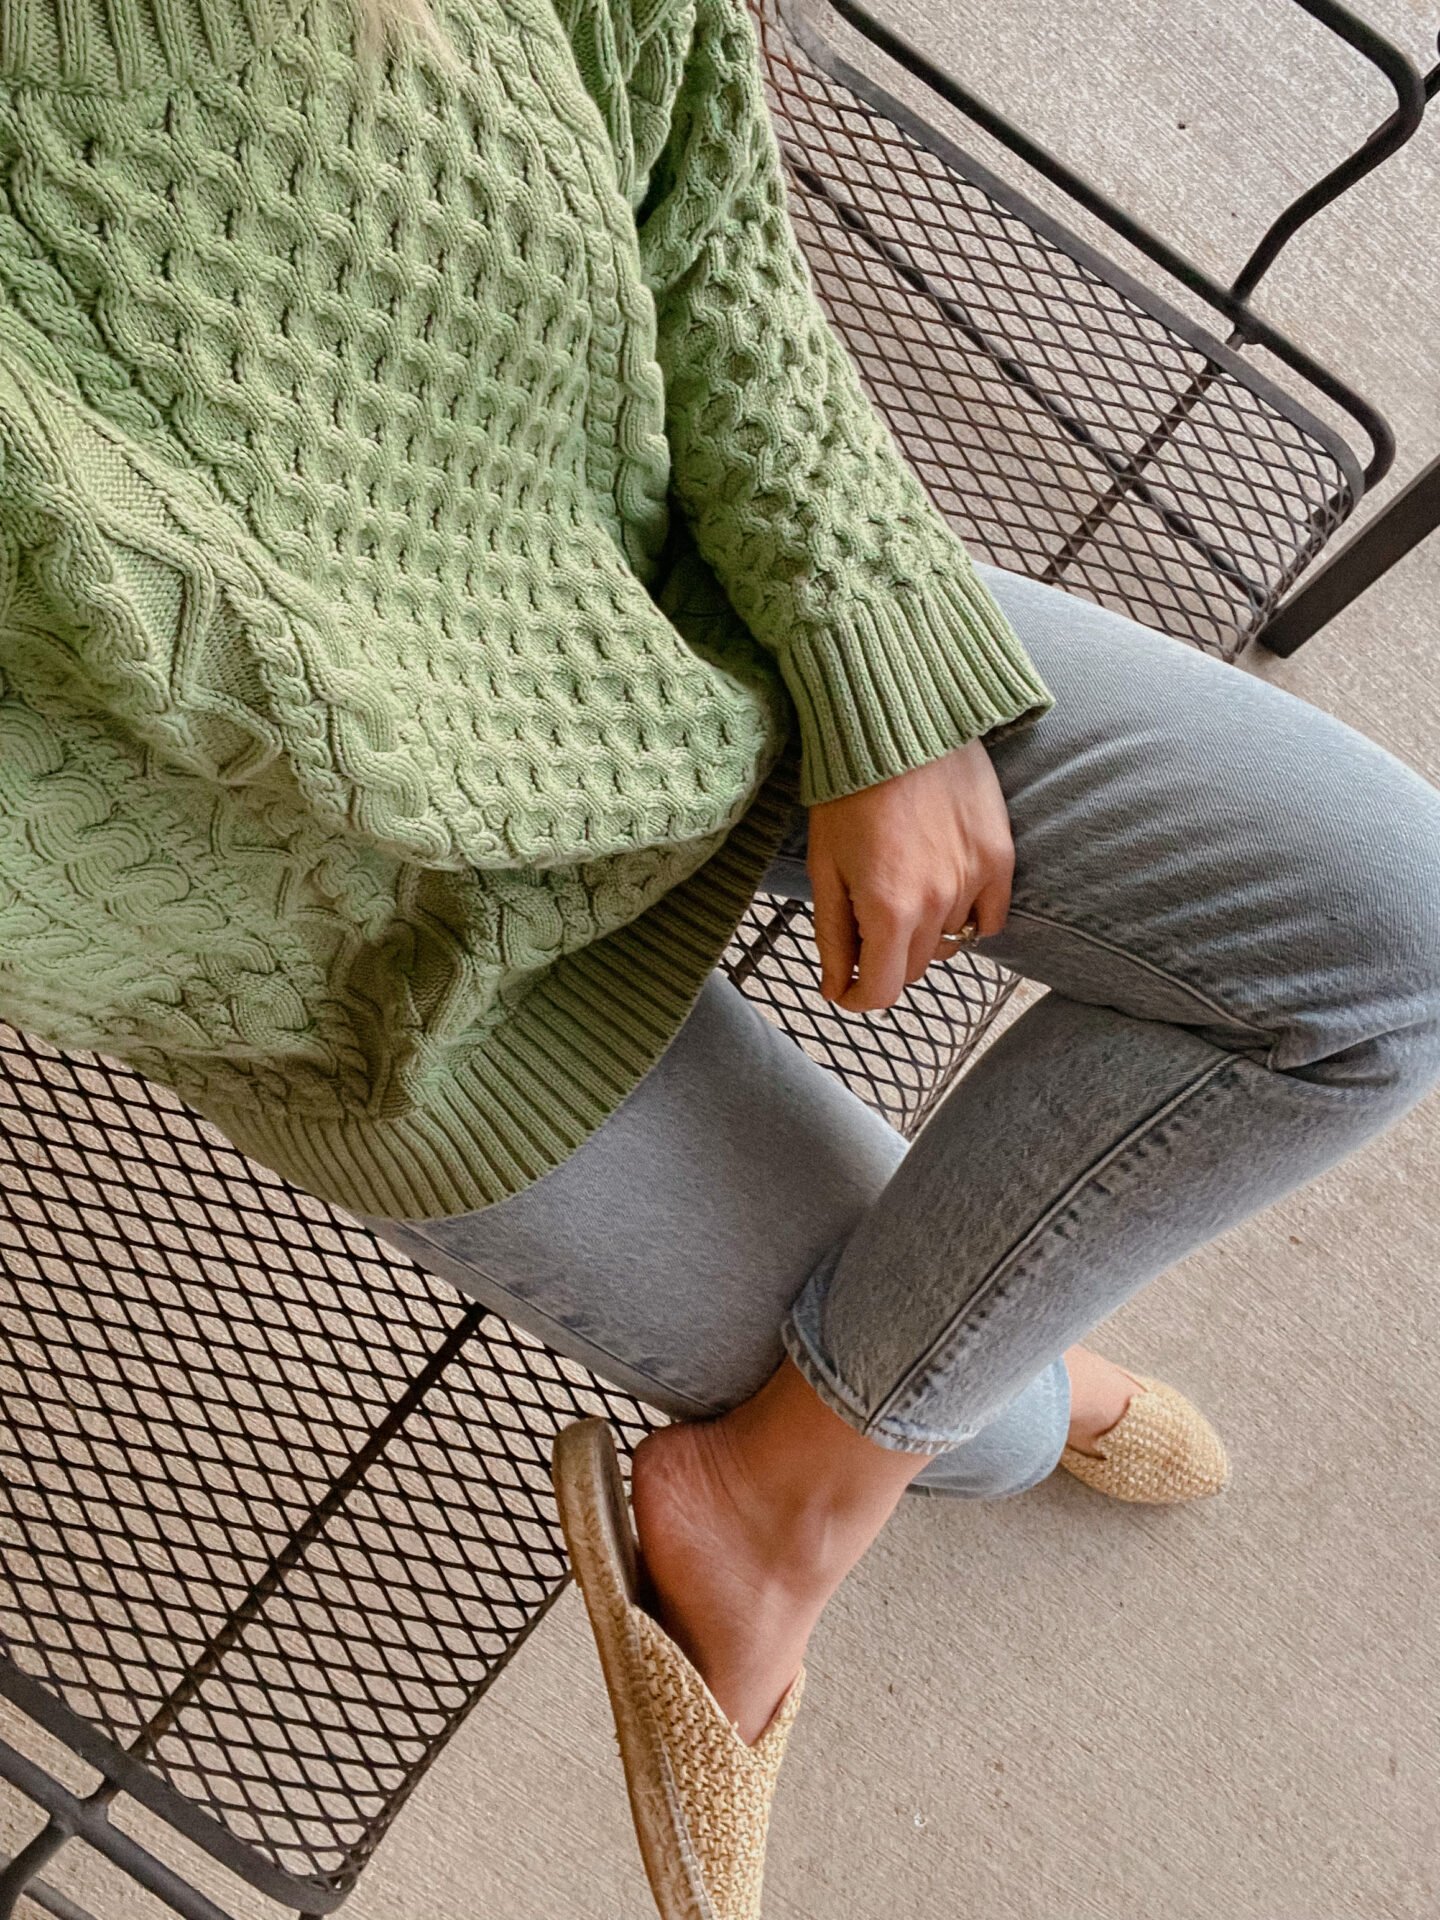 Karin Emily wears a raffia pair of mules from Manebi and a green sweater from Demylee